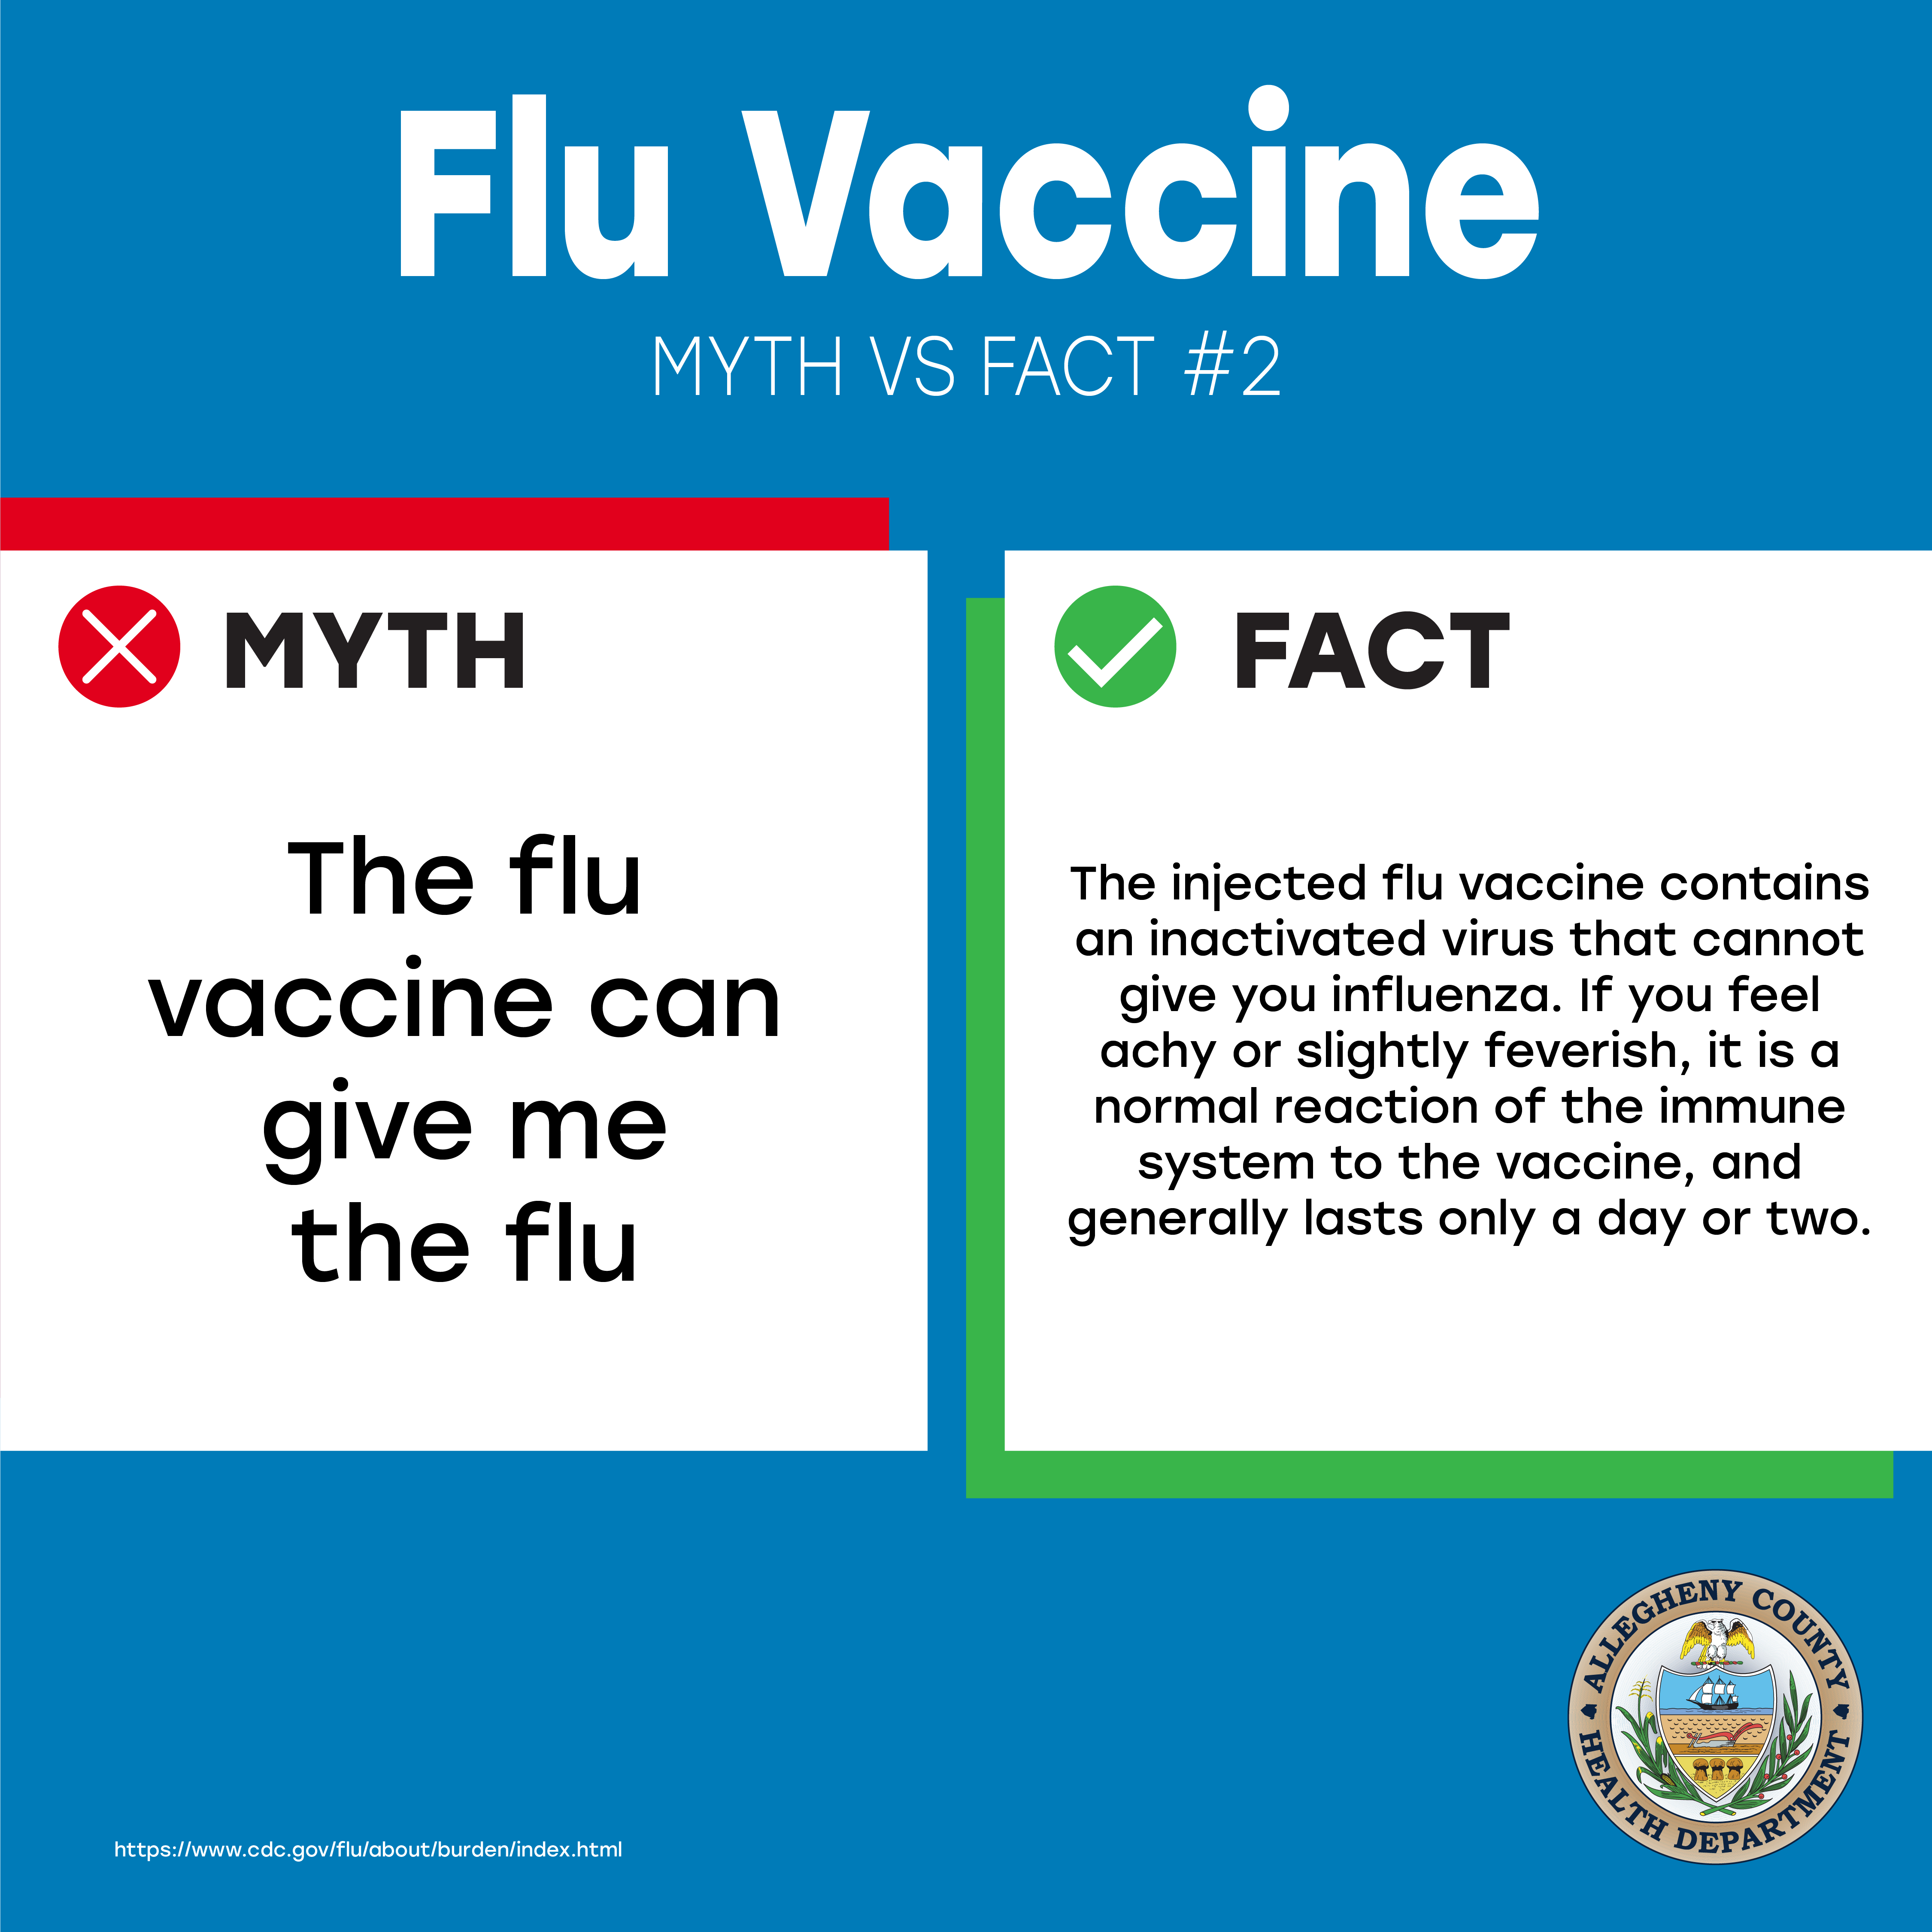 Thumbnail image of the Flu vaccine Myth vs. Fact graphic that states the flu vaccine does not cause an individual to get the flu. The Allegheny County Health Department logo is at the bottom.